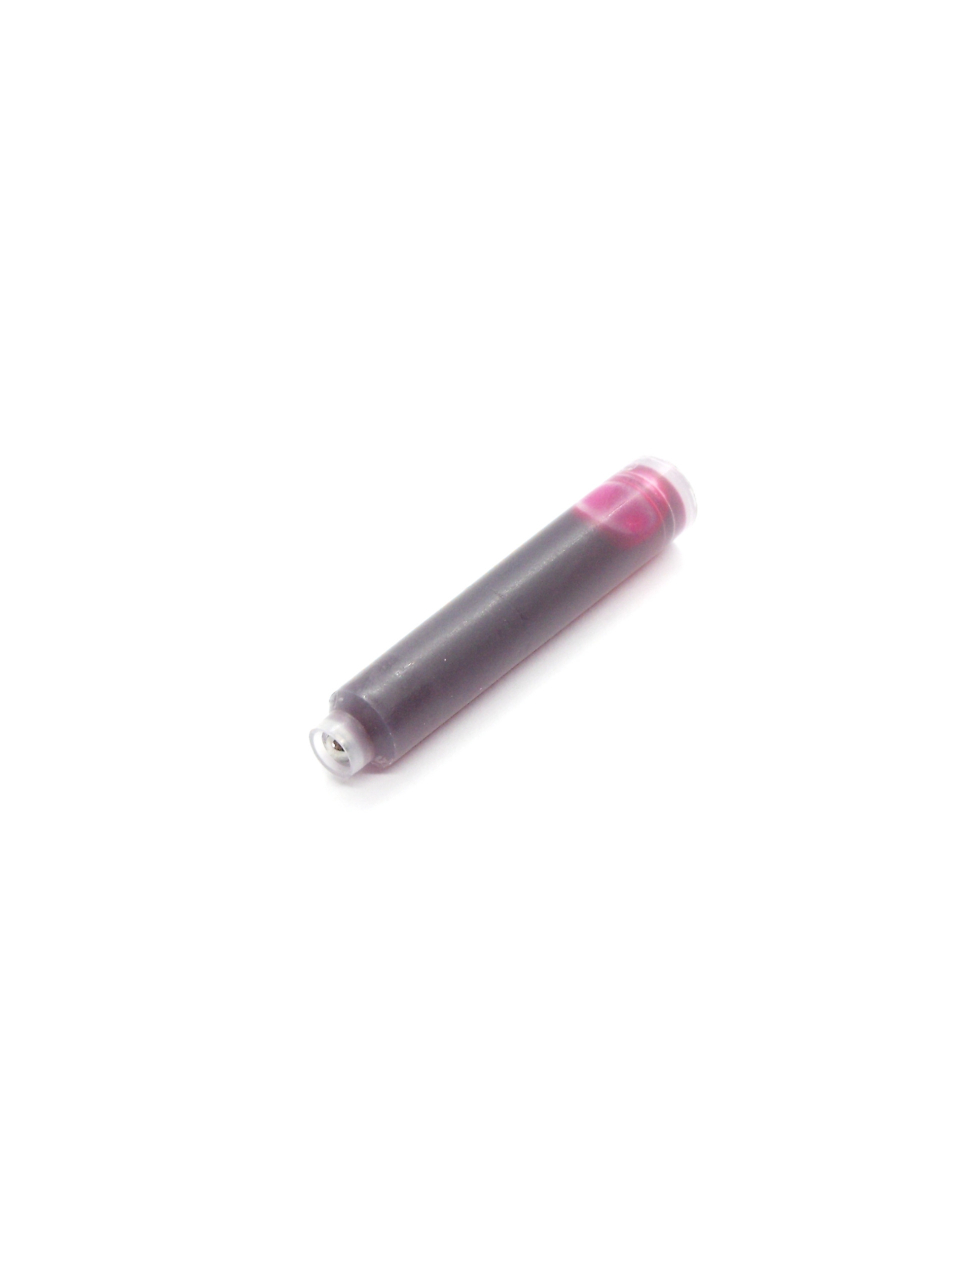 Cartridges For Stipula Fountain Pens (Pink)